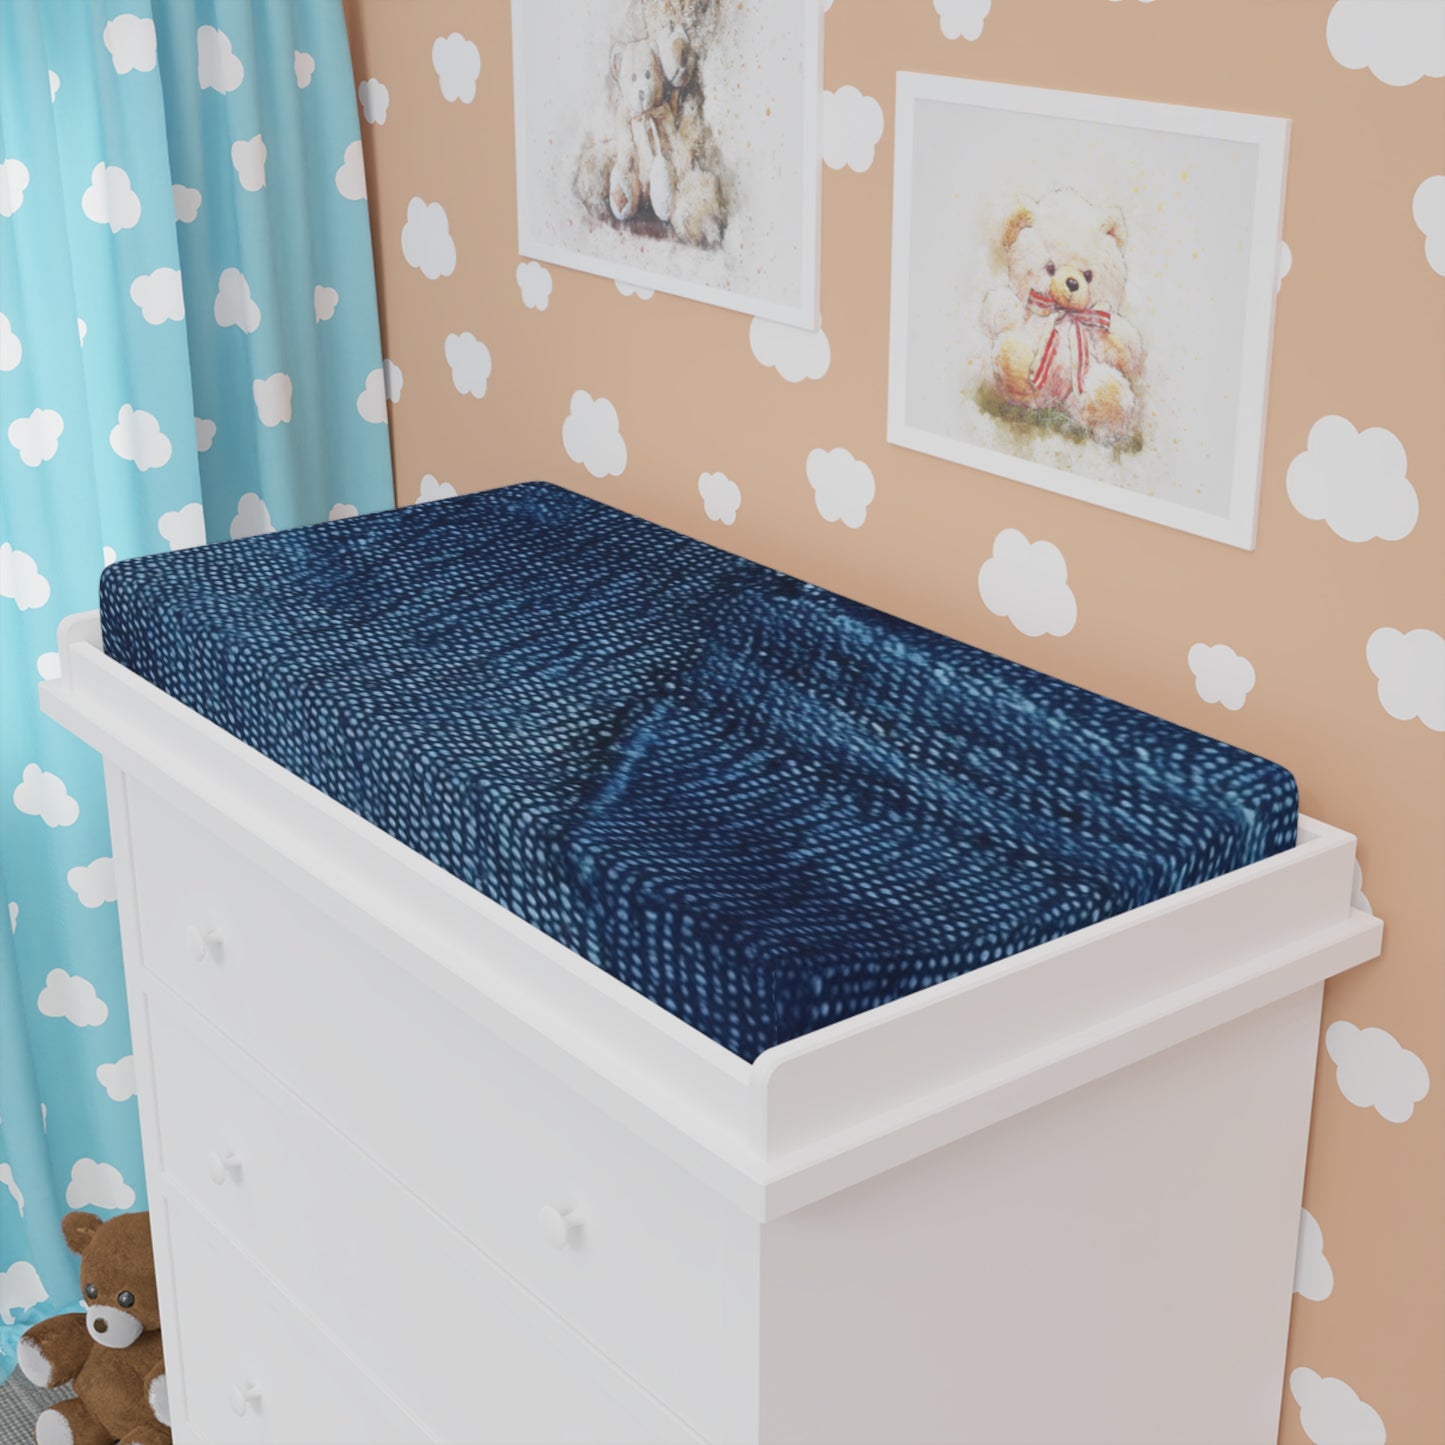 Dark Blue: Distressed Denim-Inspired Fabric Design - Baby Changing Pad Cover